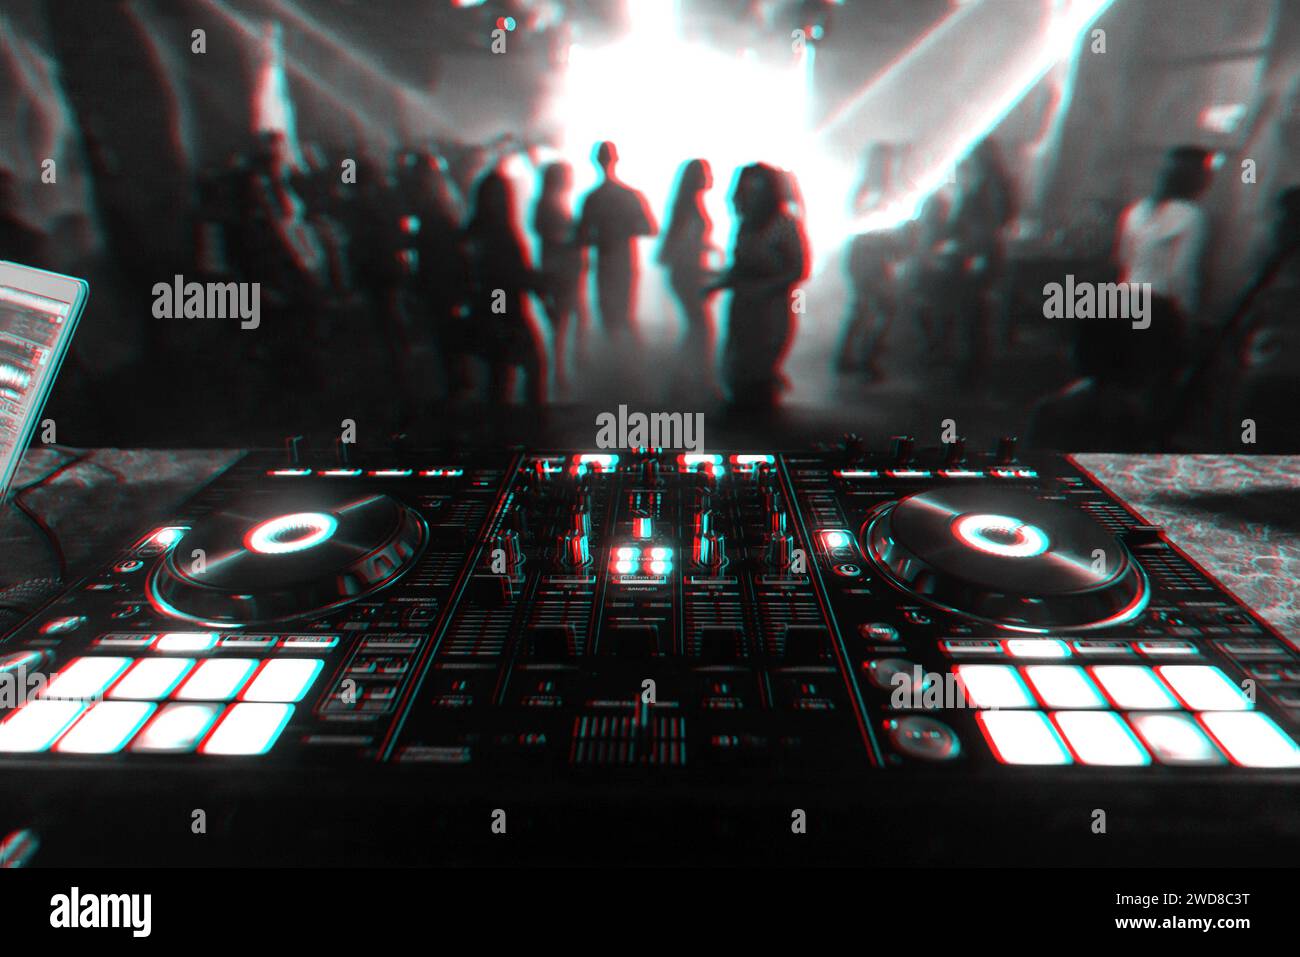 professional DJ mixer controller for mixing music in a nightclub with dancing people on the dance floor in the background. Black and white photo with Stock Photo